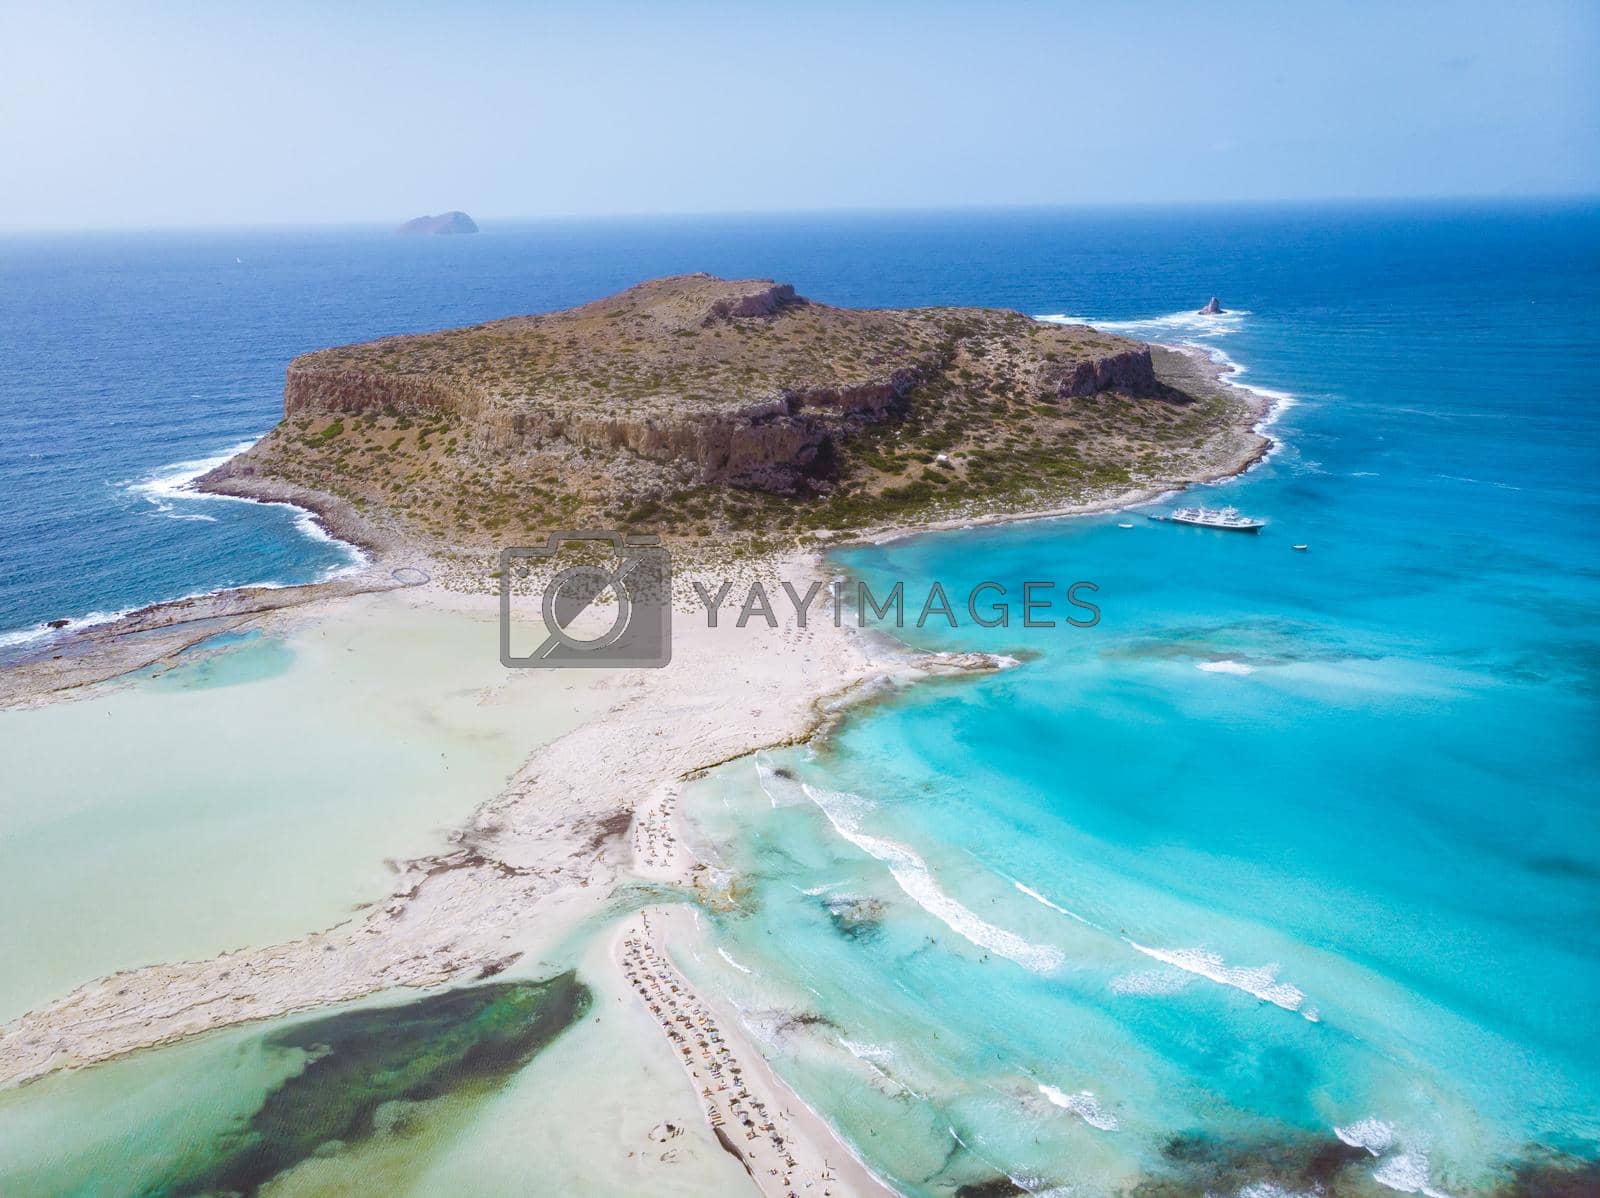 Royalty free image of Crete Greece, Balos lagoon on Crete island, Greece. Tourists relax and bath in crystal clear water of Balos beach. by fokkebok